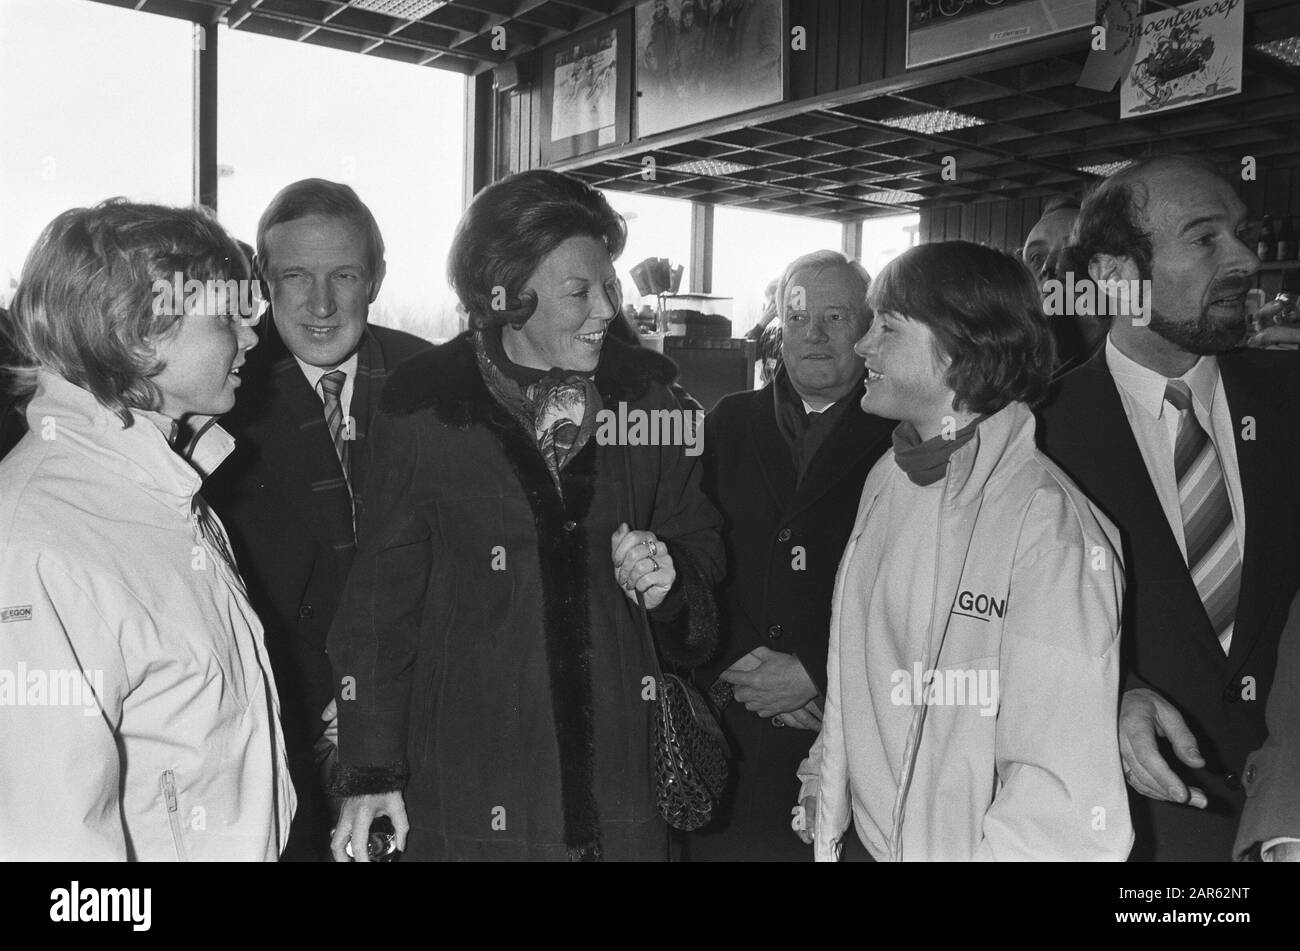 World Ice Skating Women in The Hague  Queen Beatrix, present at part of World Championships skating in conversation with skaters Yvonne van Gennip and Ria Visser Date: 8 February 1986 Location: The Hague, Zuid-Holland Keywords : queens, skating, sports Person name: Beatrix (queen Netherlands), Gennip, Yvonne van, Fisherman, Ria Stock Photo